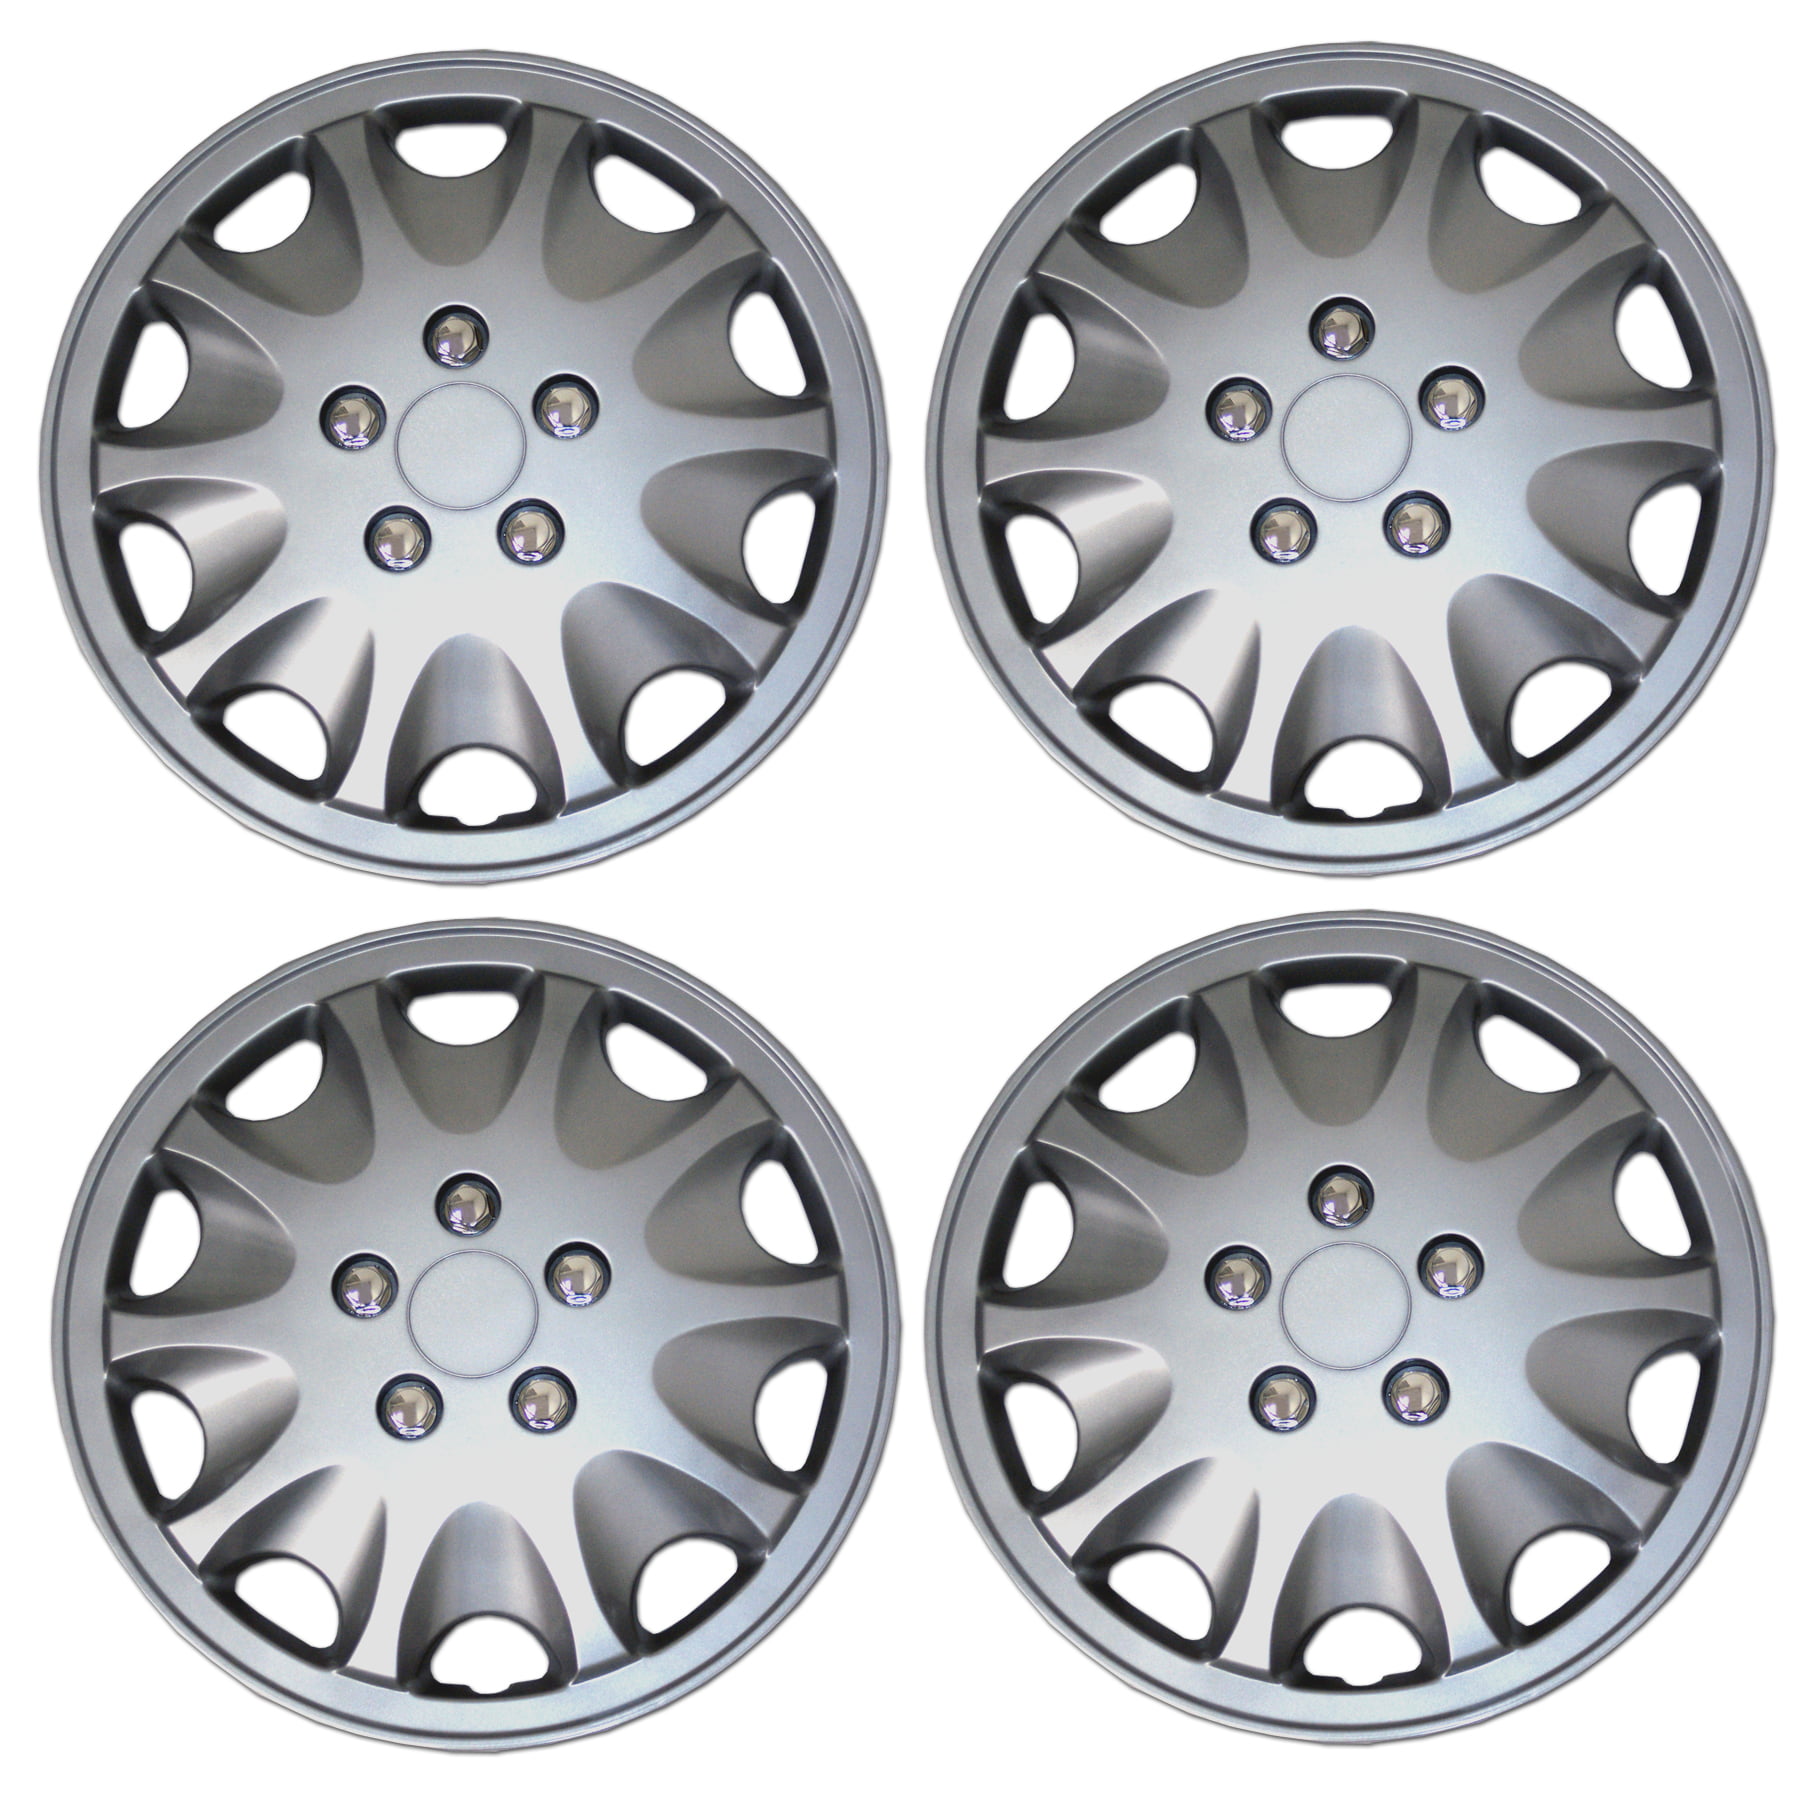 TuningPros WSC3-028AS15 4pcs Set Snap-On Type Pop-On 15-Inches Metallic Silver Hubcaps Wheel Cover 